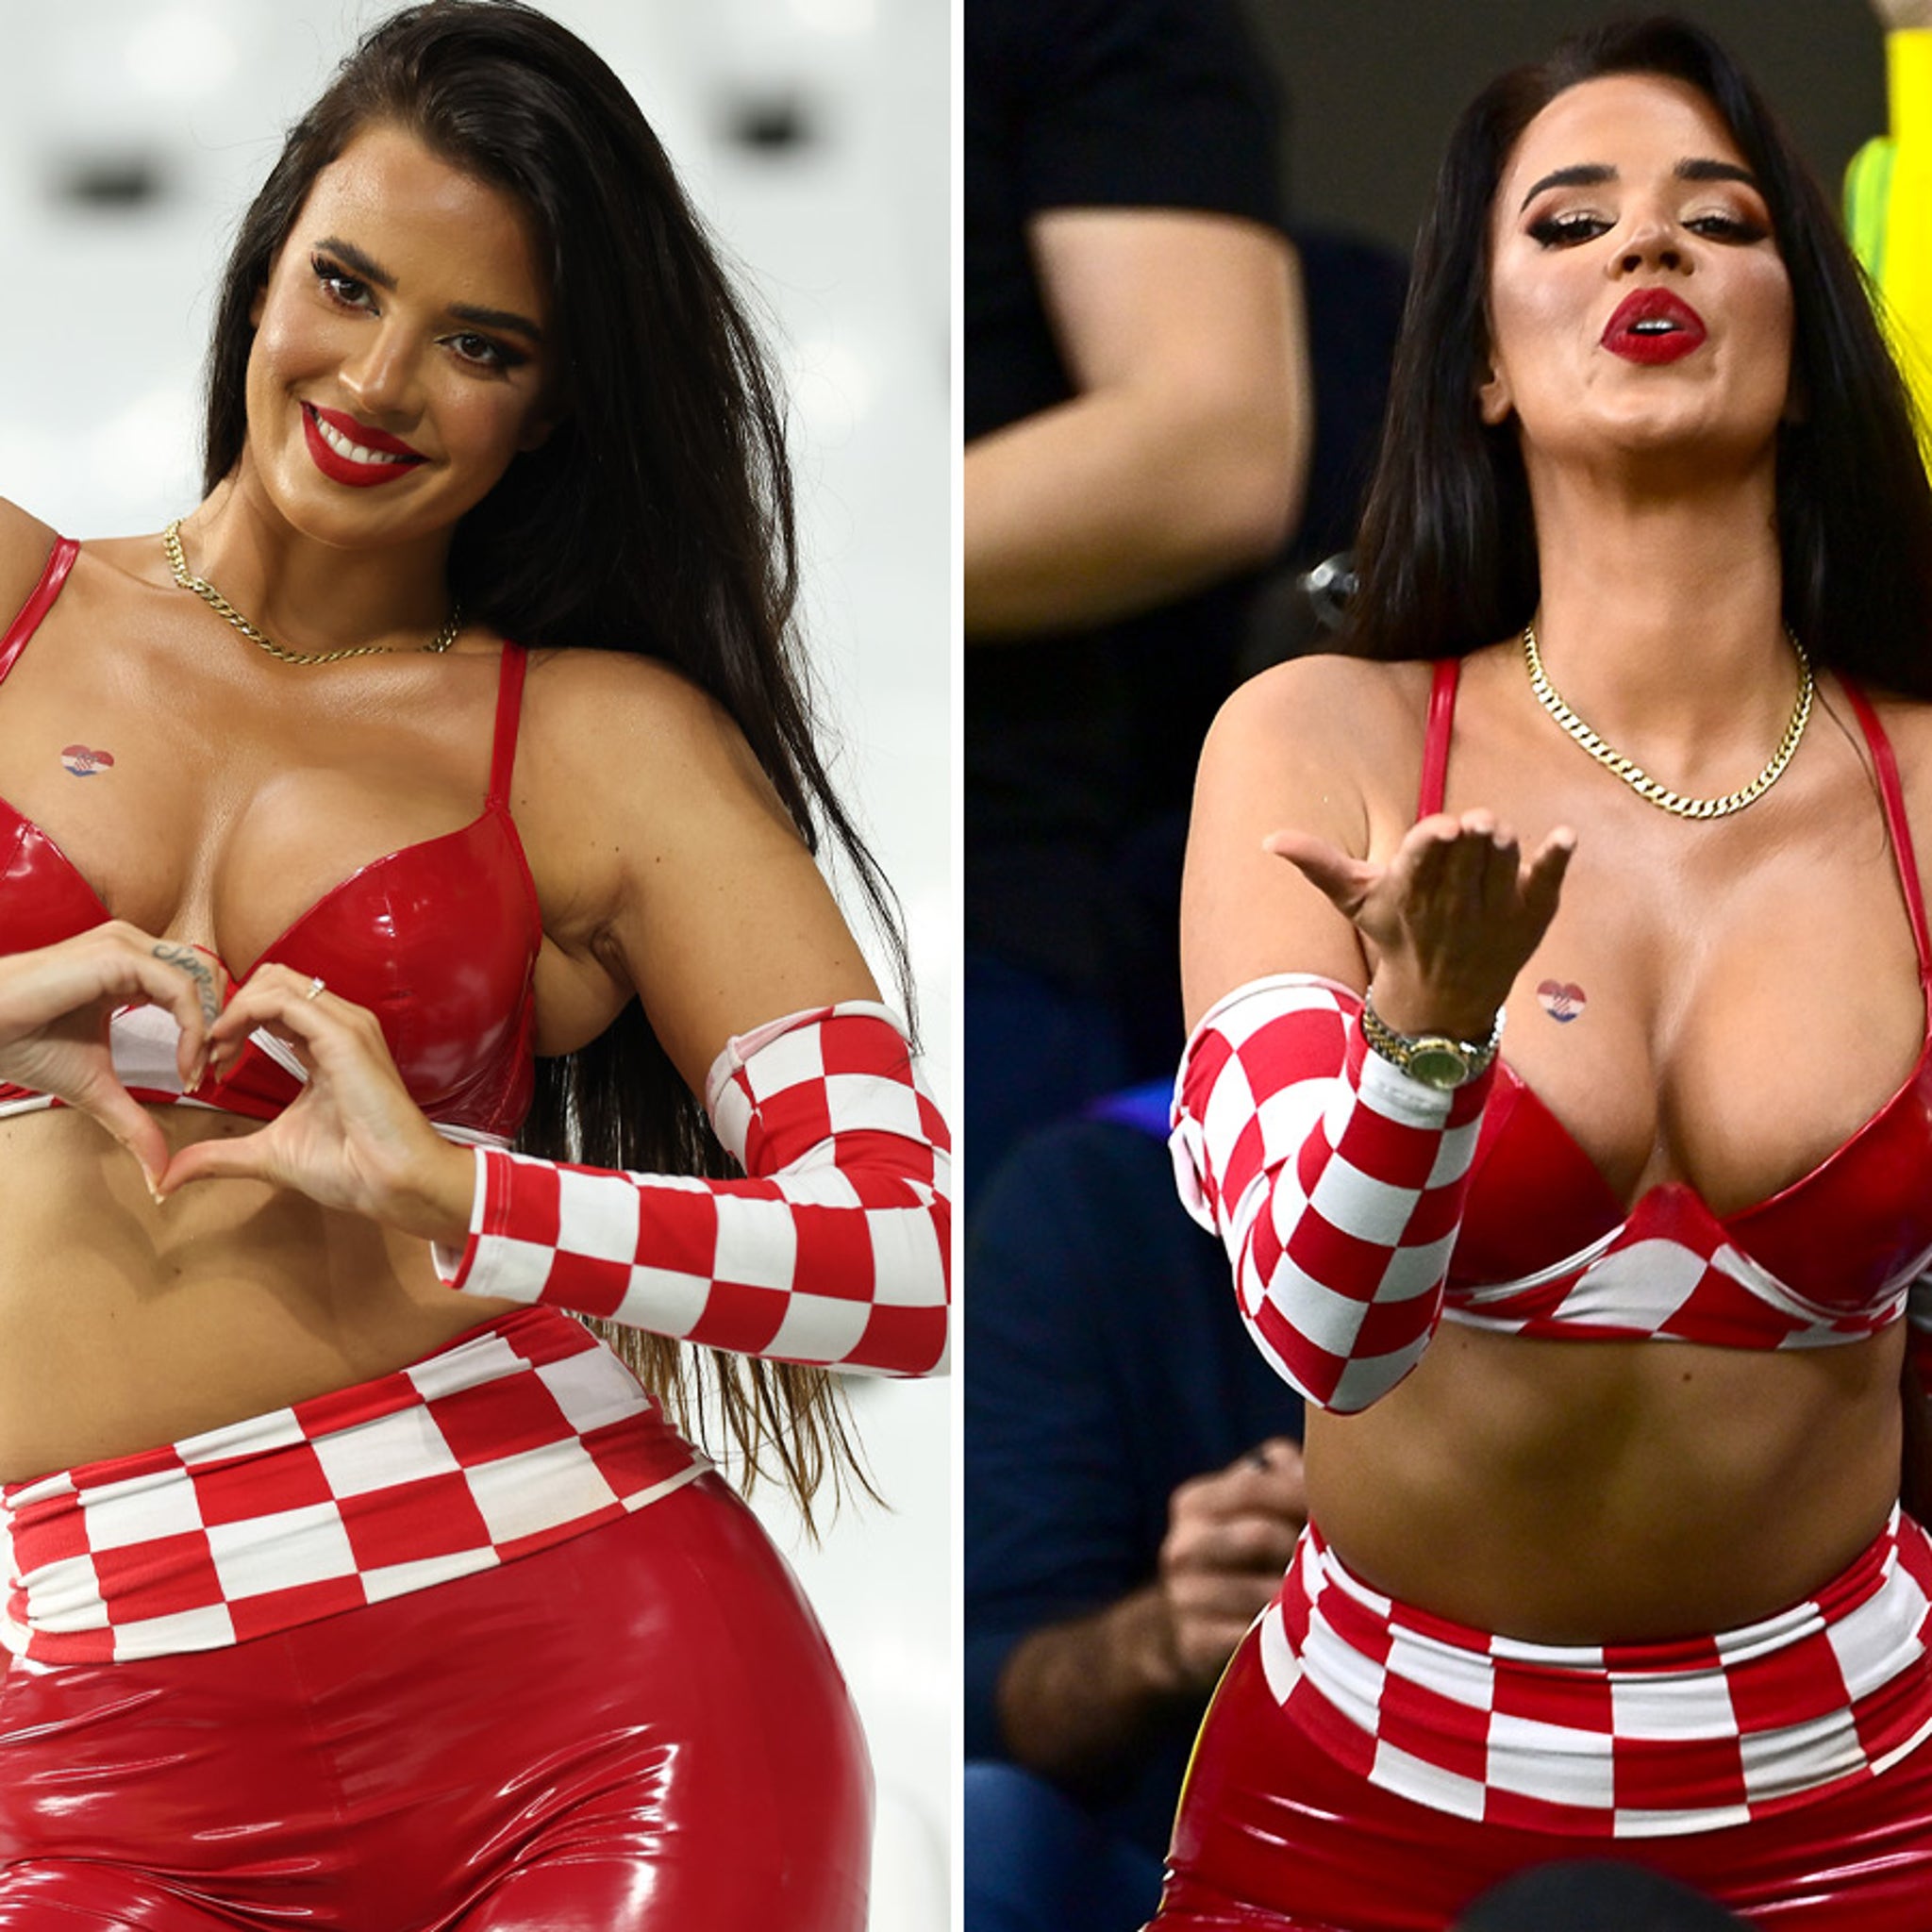 Sexy Girl Vidos - Model Ivana Knoll Celebrates Croatia's Huge World Cup Win In Sexy Outfit